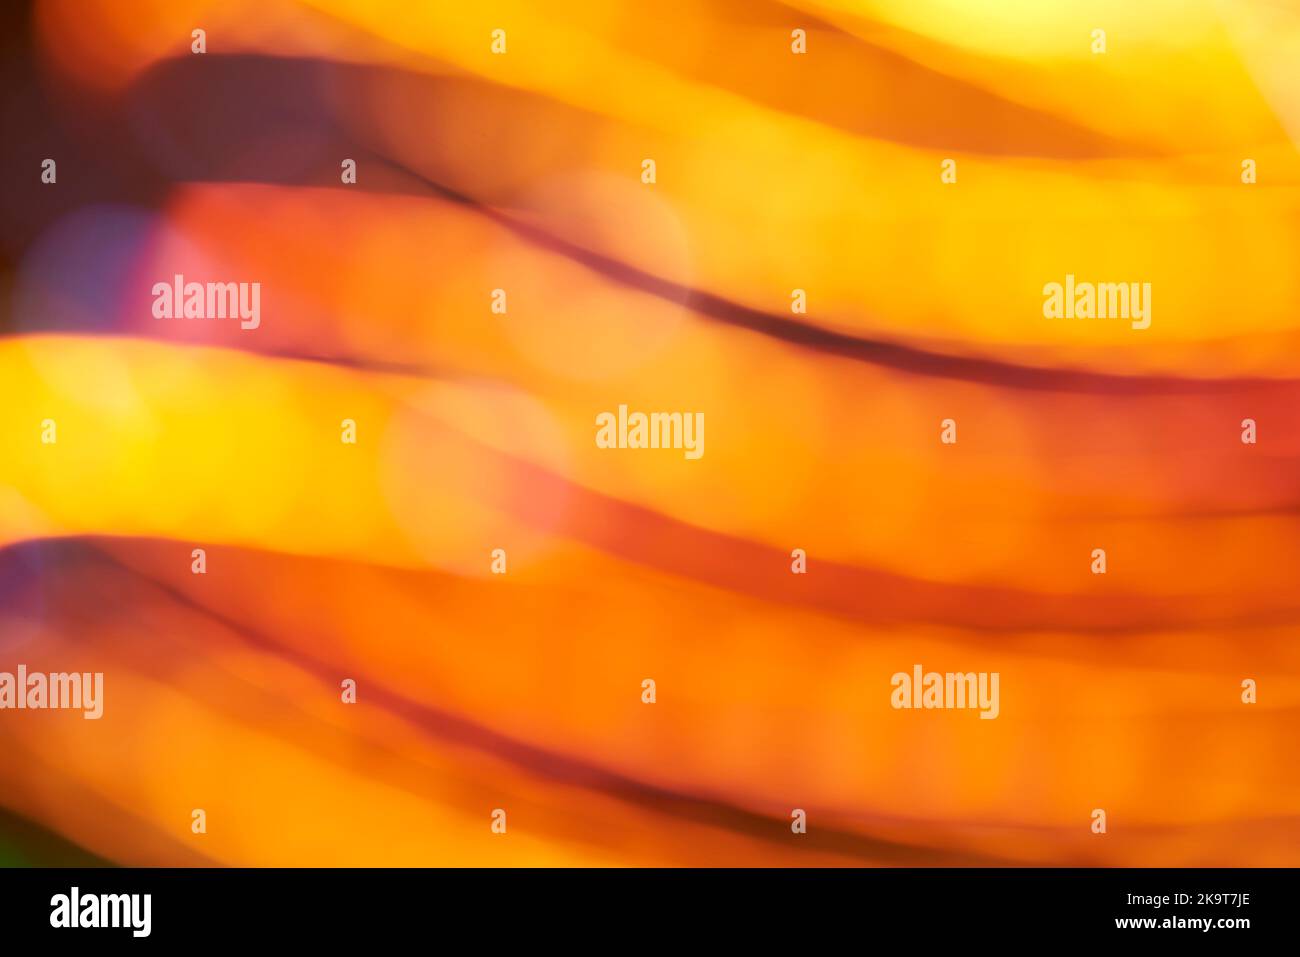 Abstract blurred colorful lights background, dynamic flowing design in warm orange vivid colors. Stock Photo